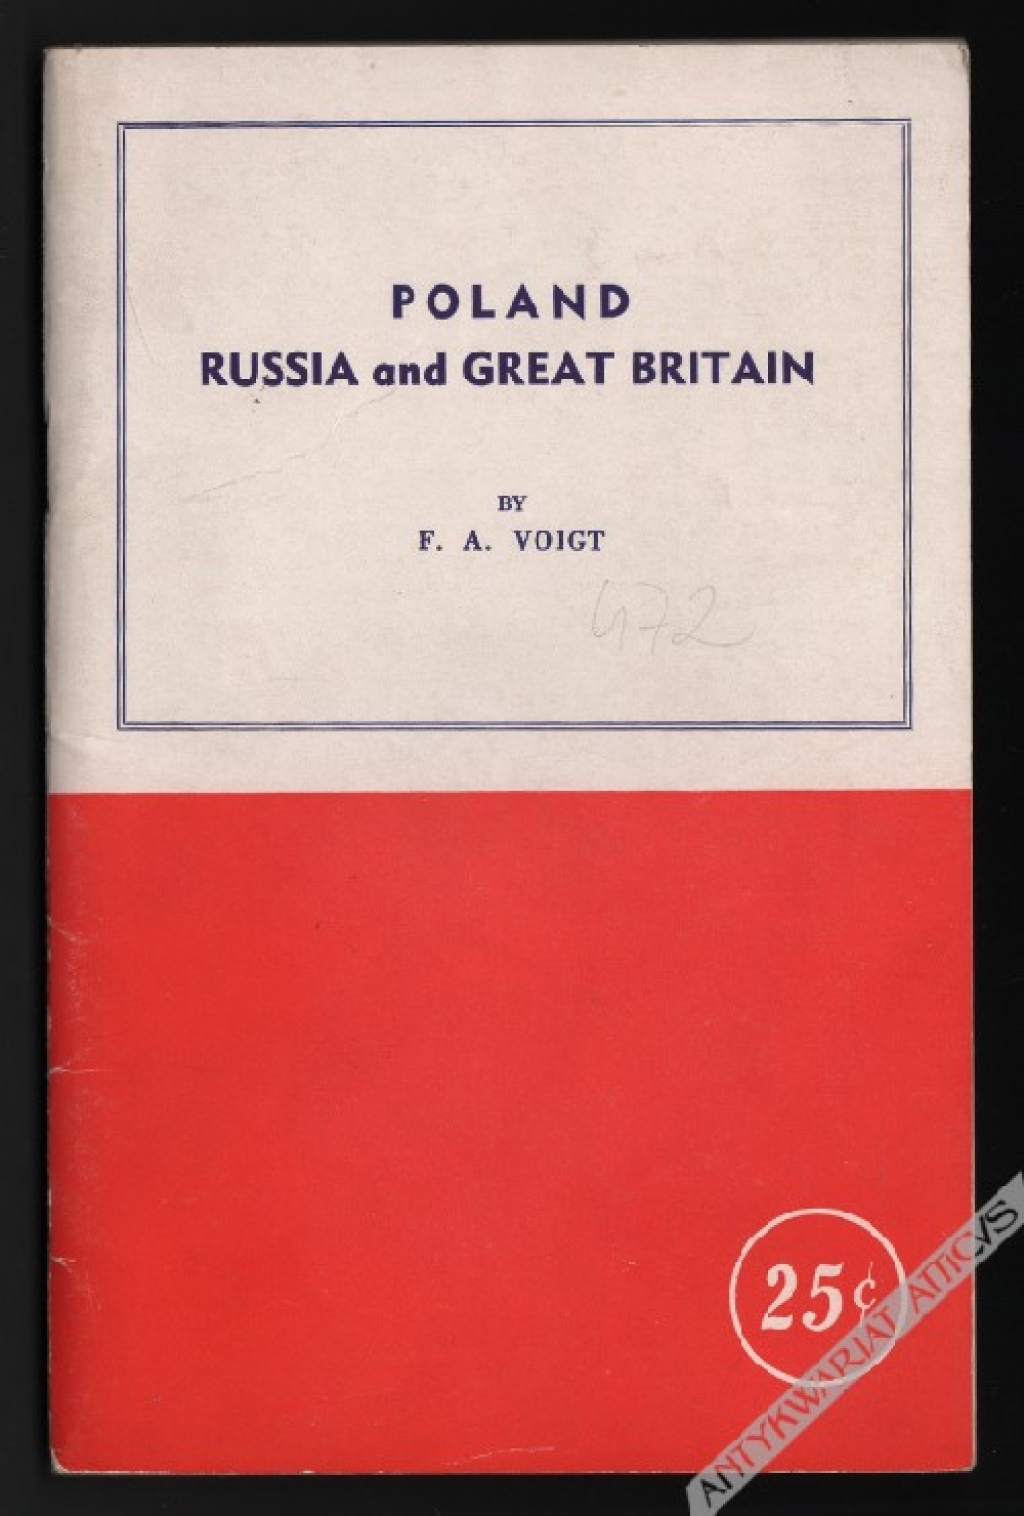 Poland, Russia and Great Britain